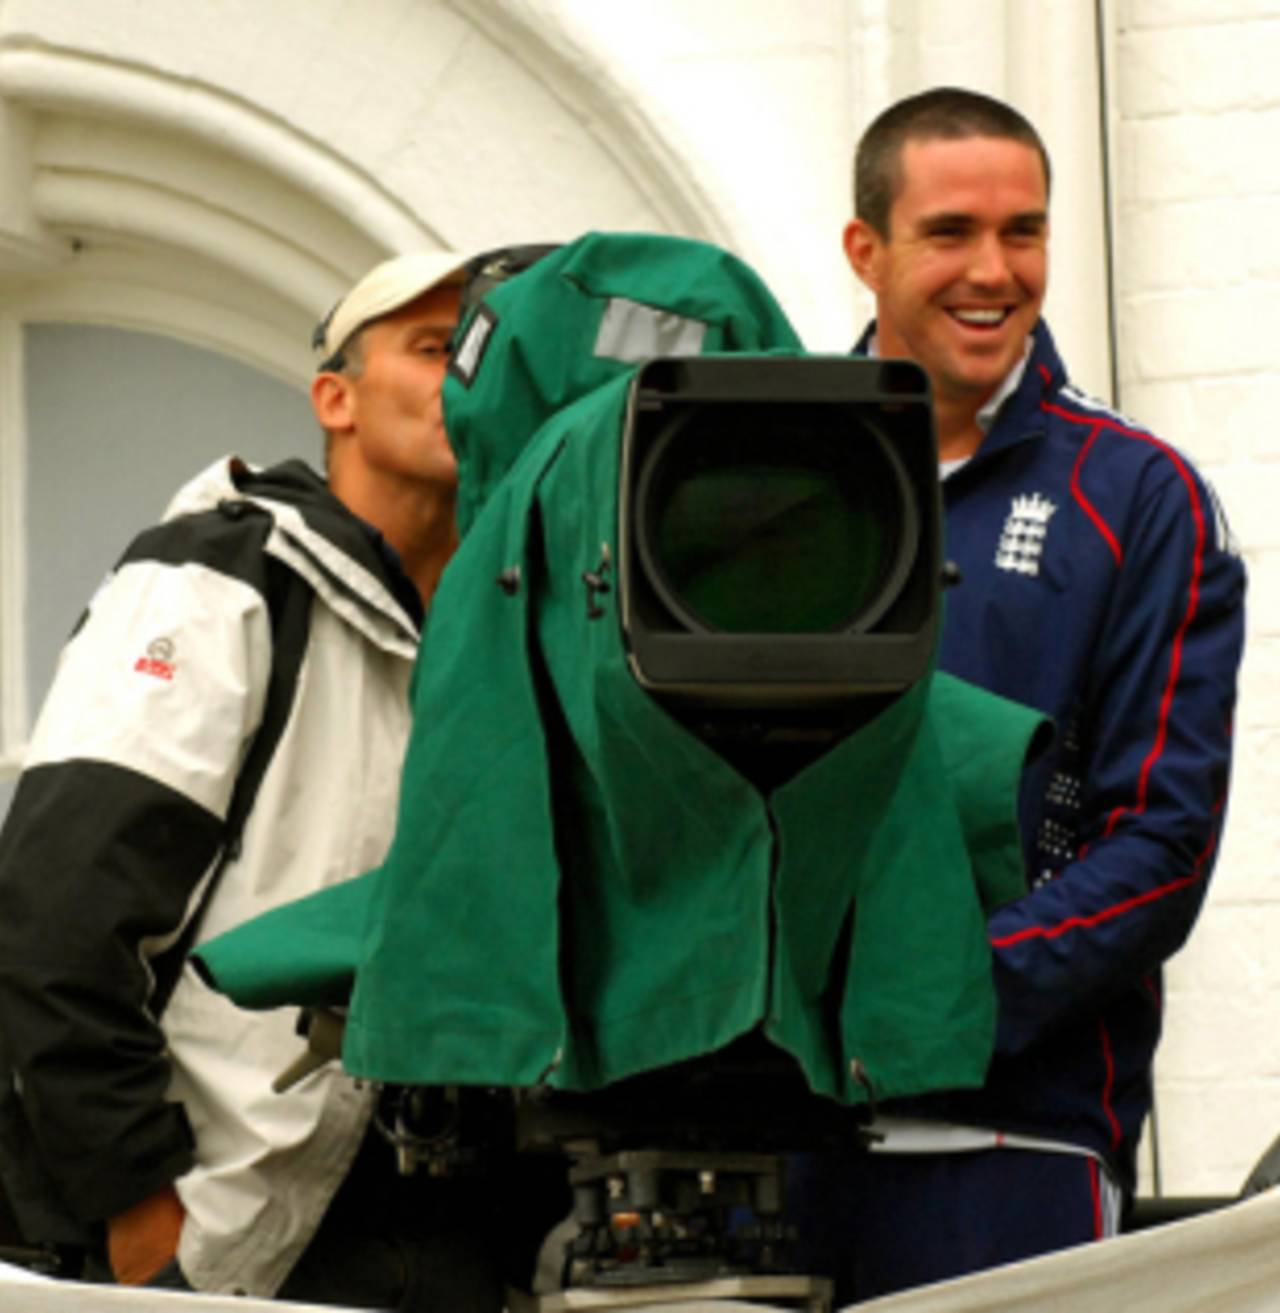 Kevin Pietersen larks about behind one of the Sky TV cameras as rain washed out the third morning, England v New Zealand, 3rd Test, Trent Bridge, June 6, 2008